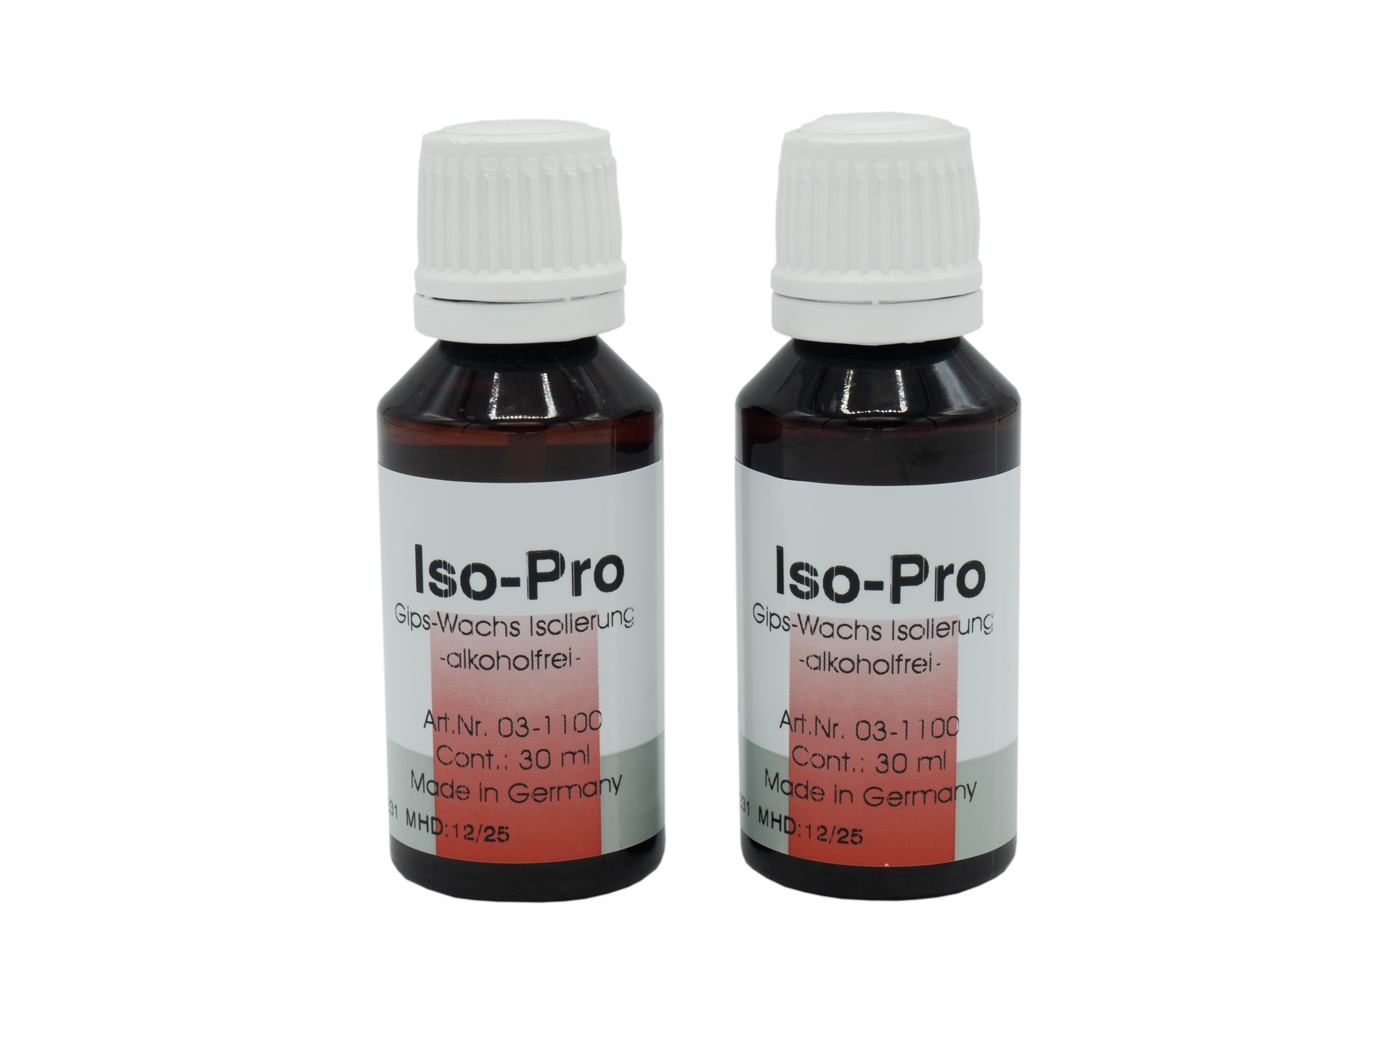 Iso-Pro Gips-Wachs Isolierung Pinselflasche, 2 x 30 ml